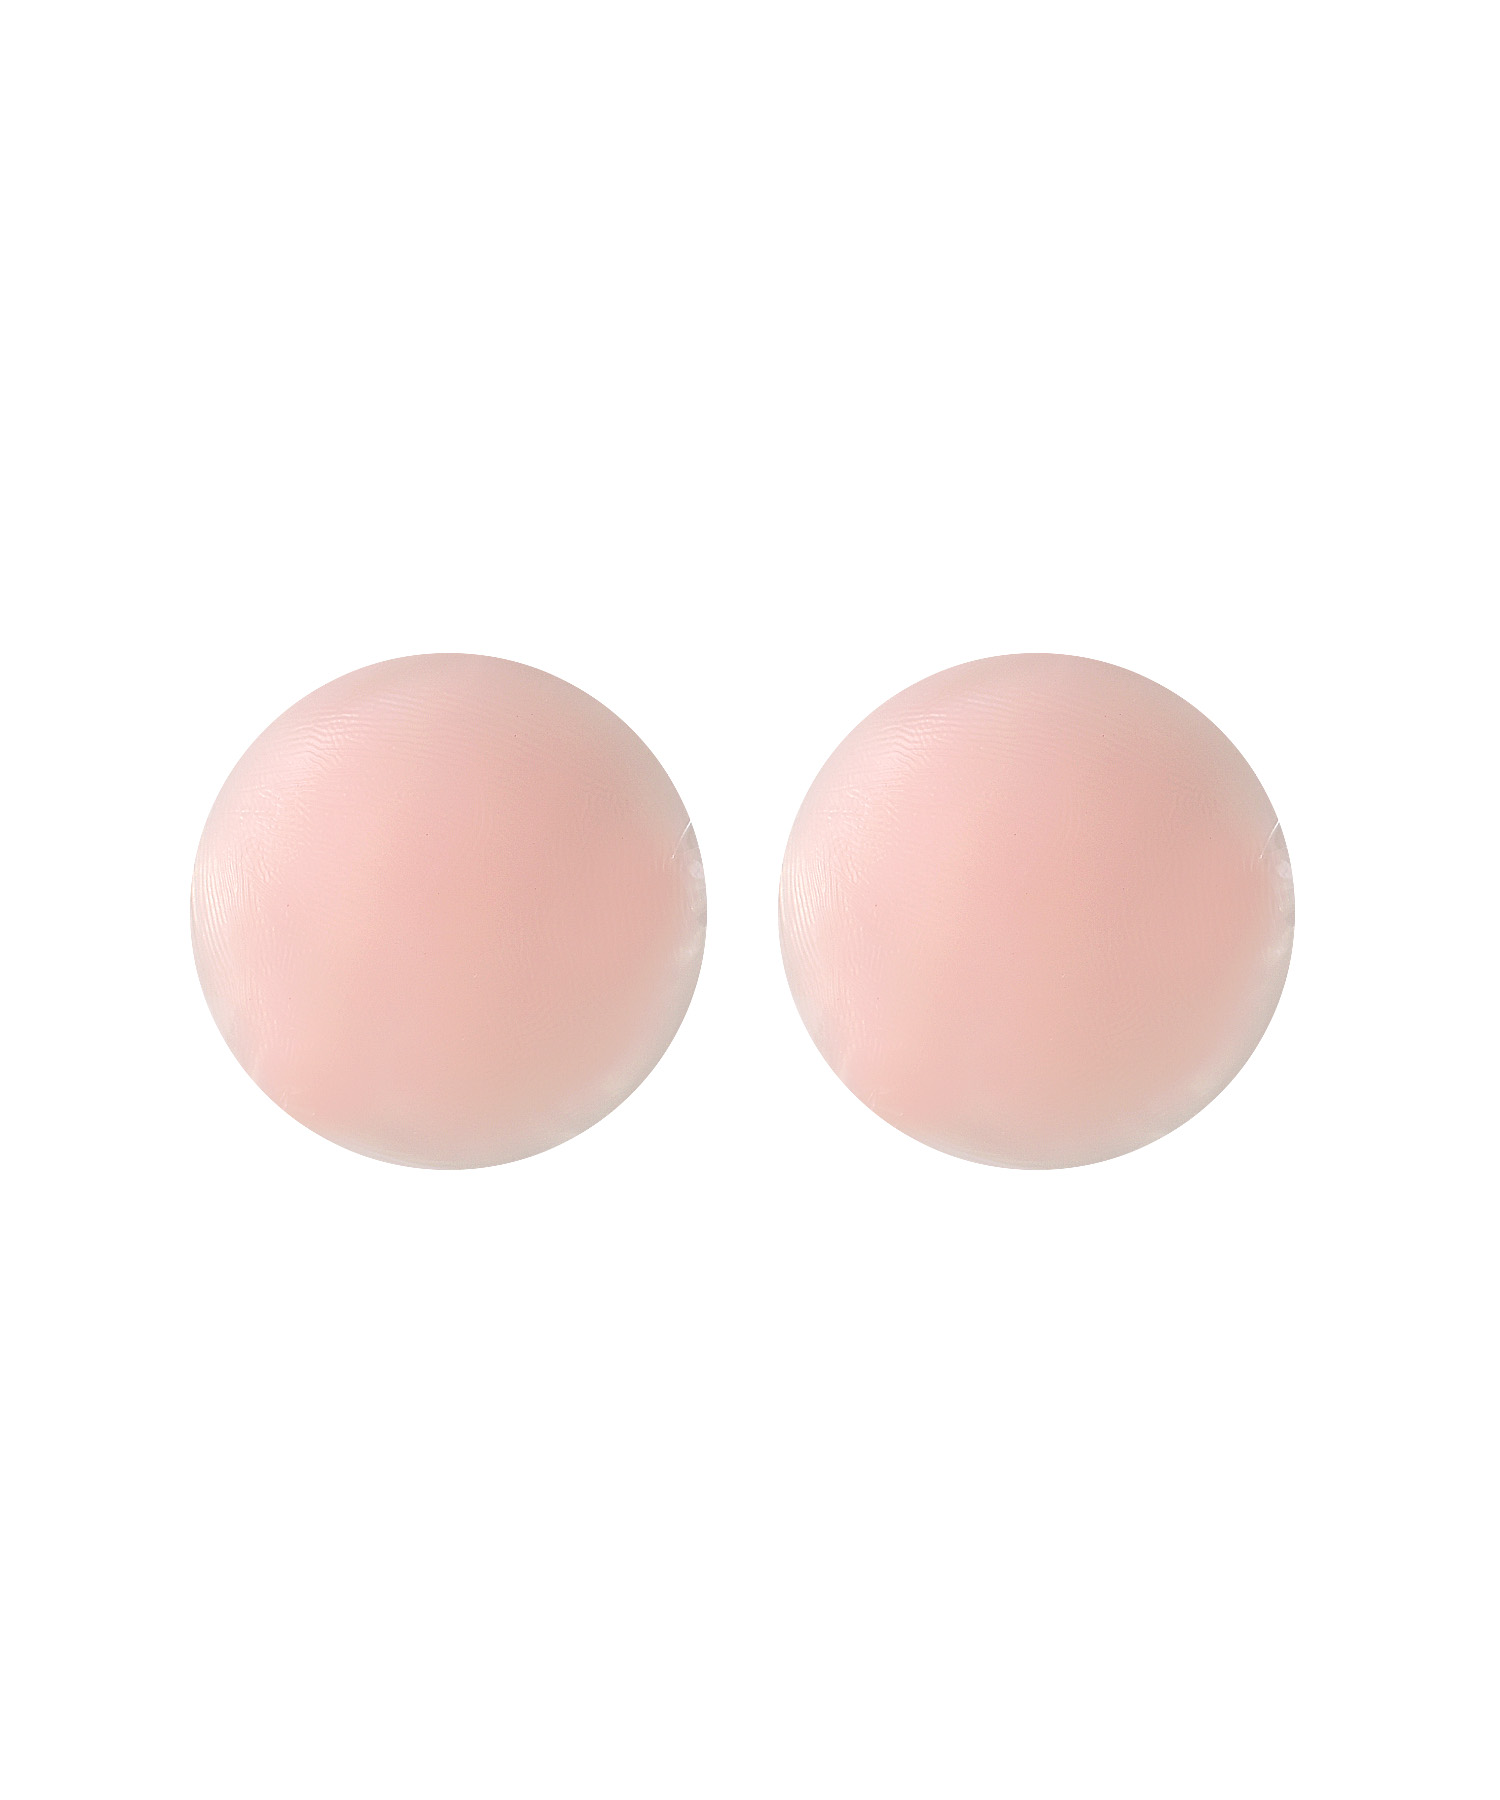 Silicone Nipple Concealers Women's Intimates Bra Online